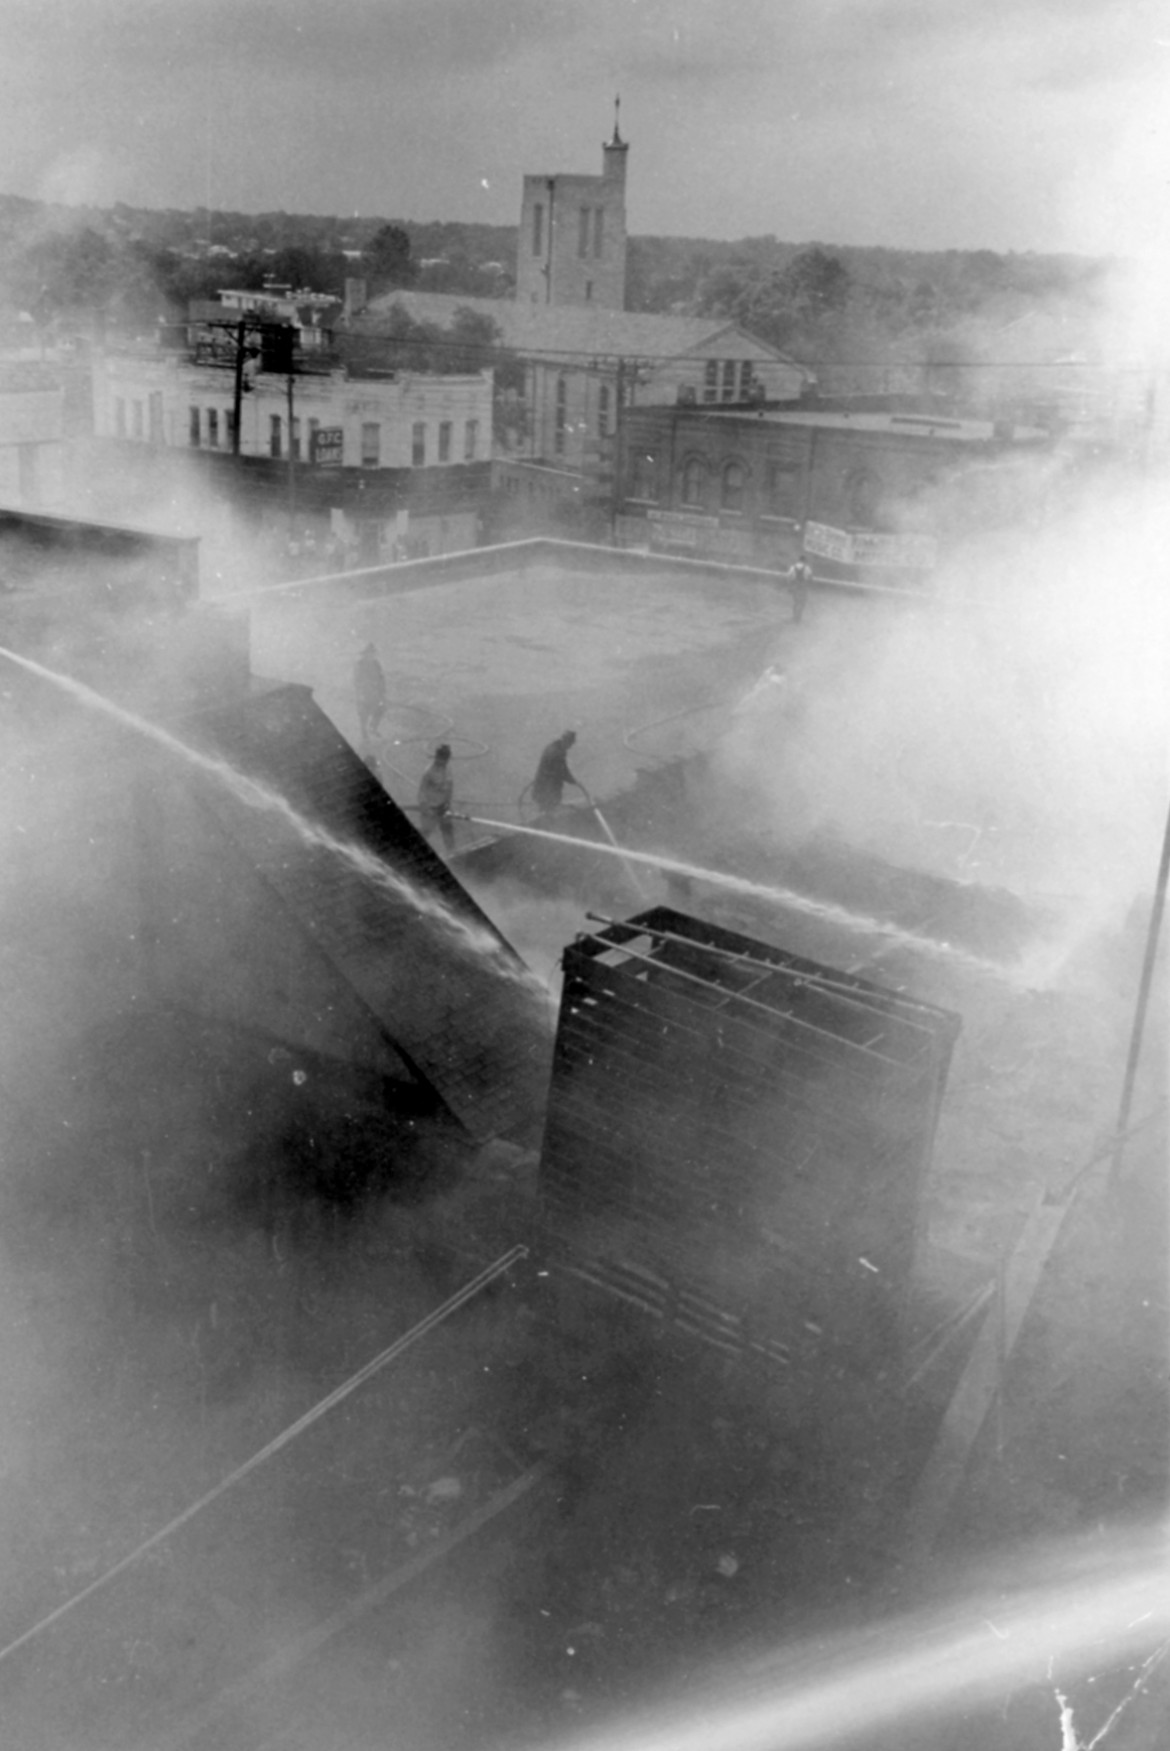 This view from the roof gives us an interesting look at the buildings nearby.  Courtesy of Maplewood Public Library